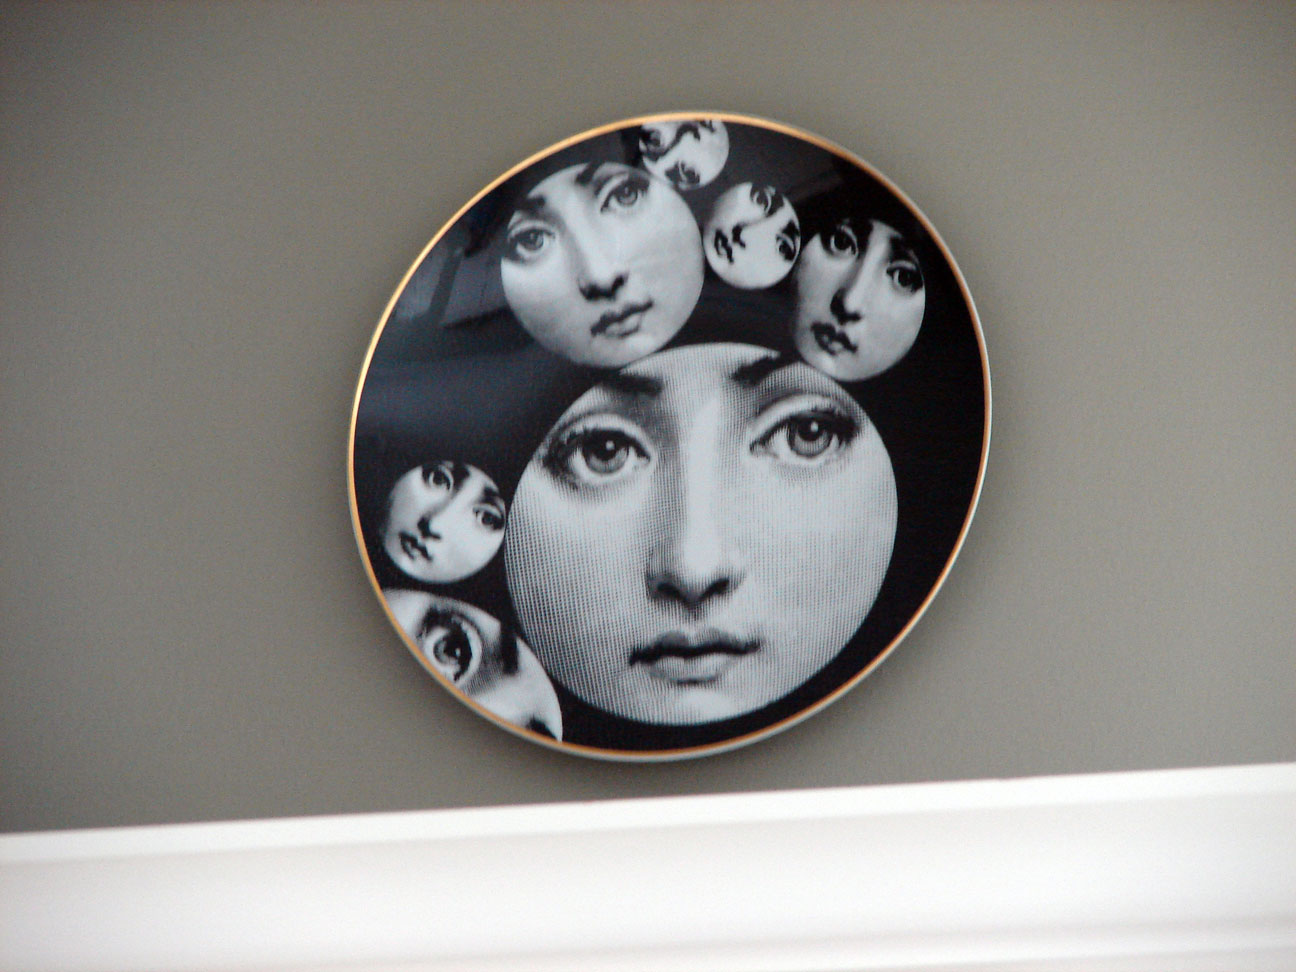 I found this information on Fornasetti here 